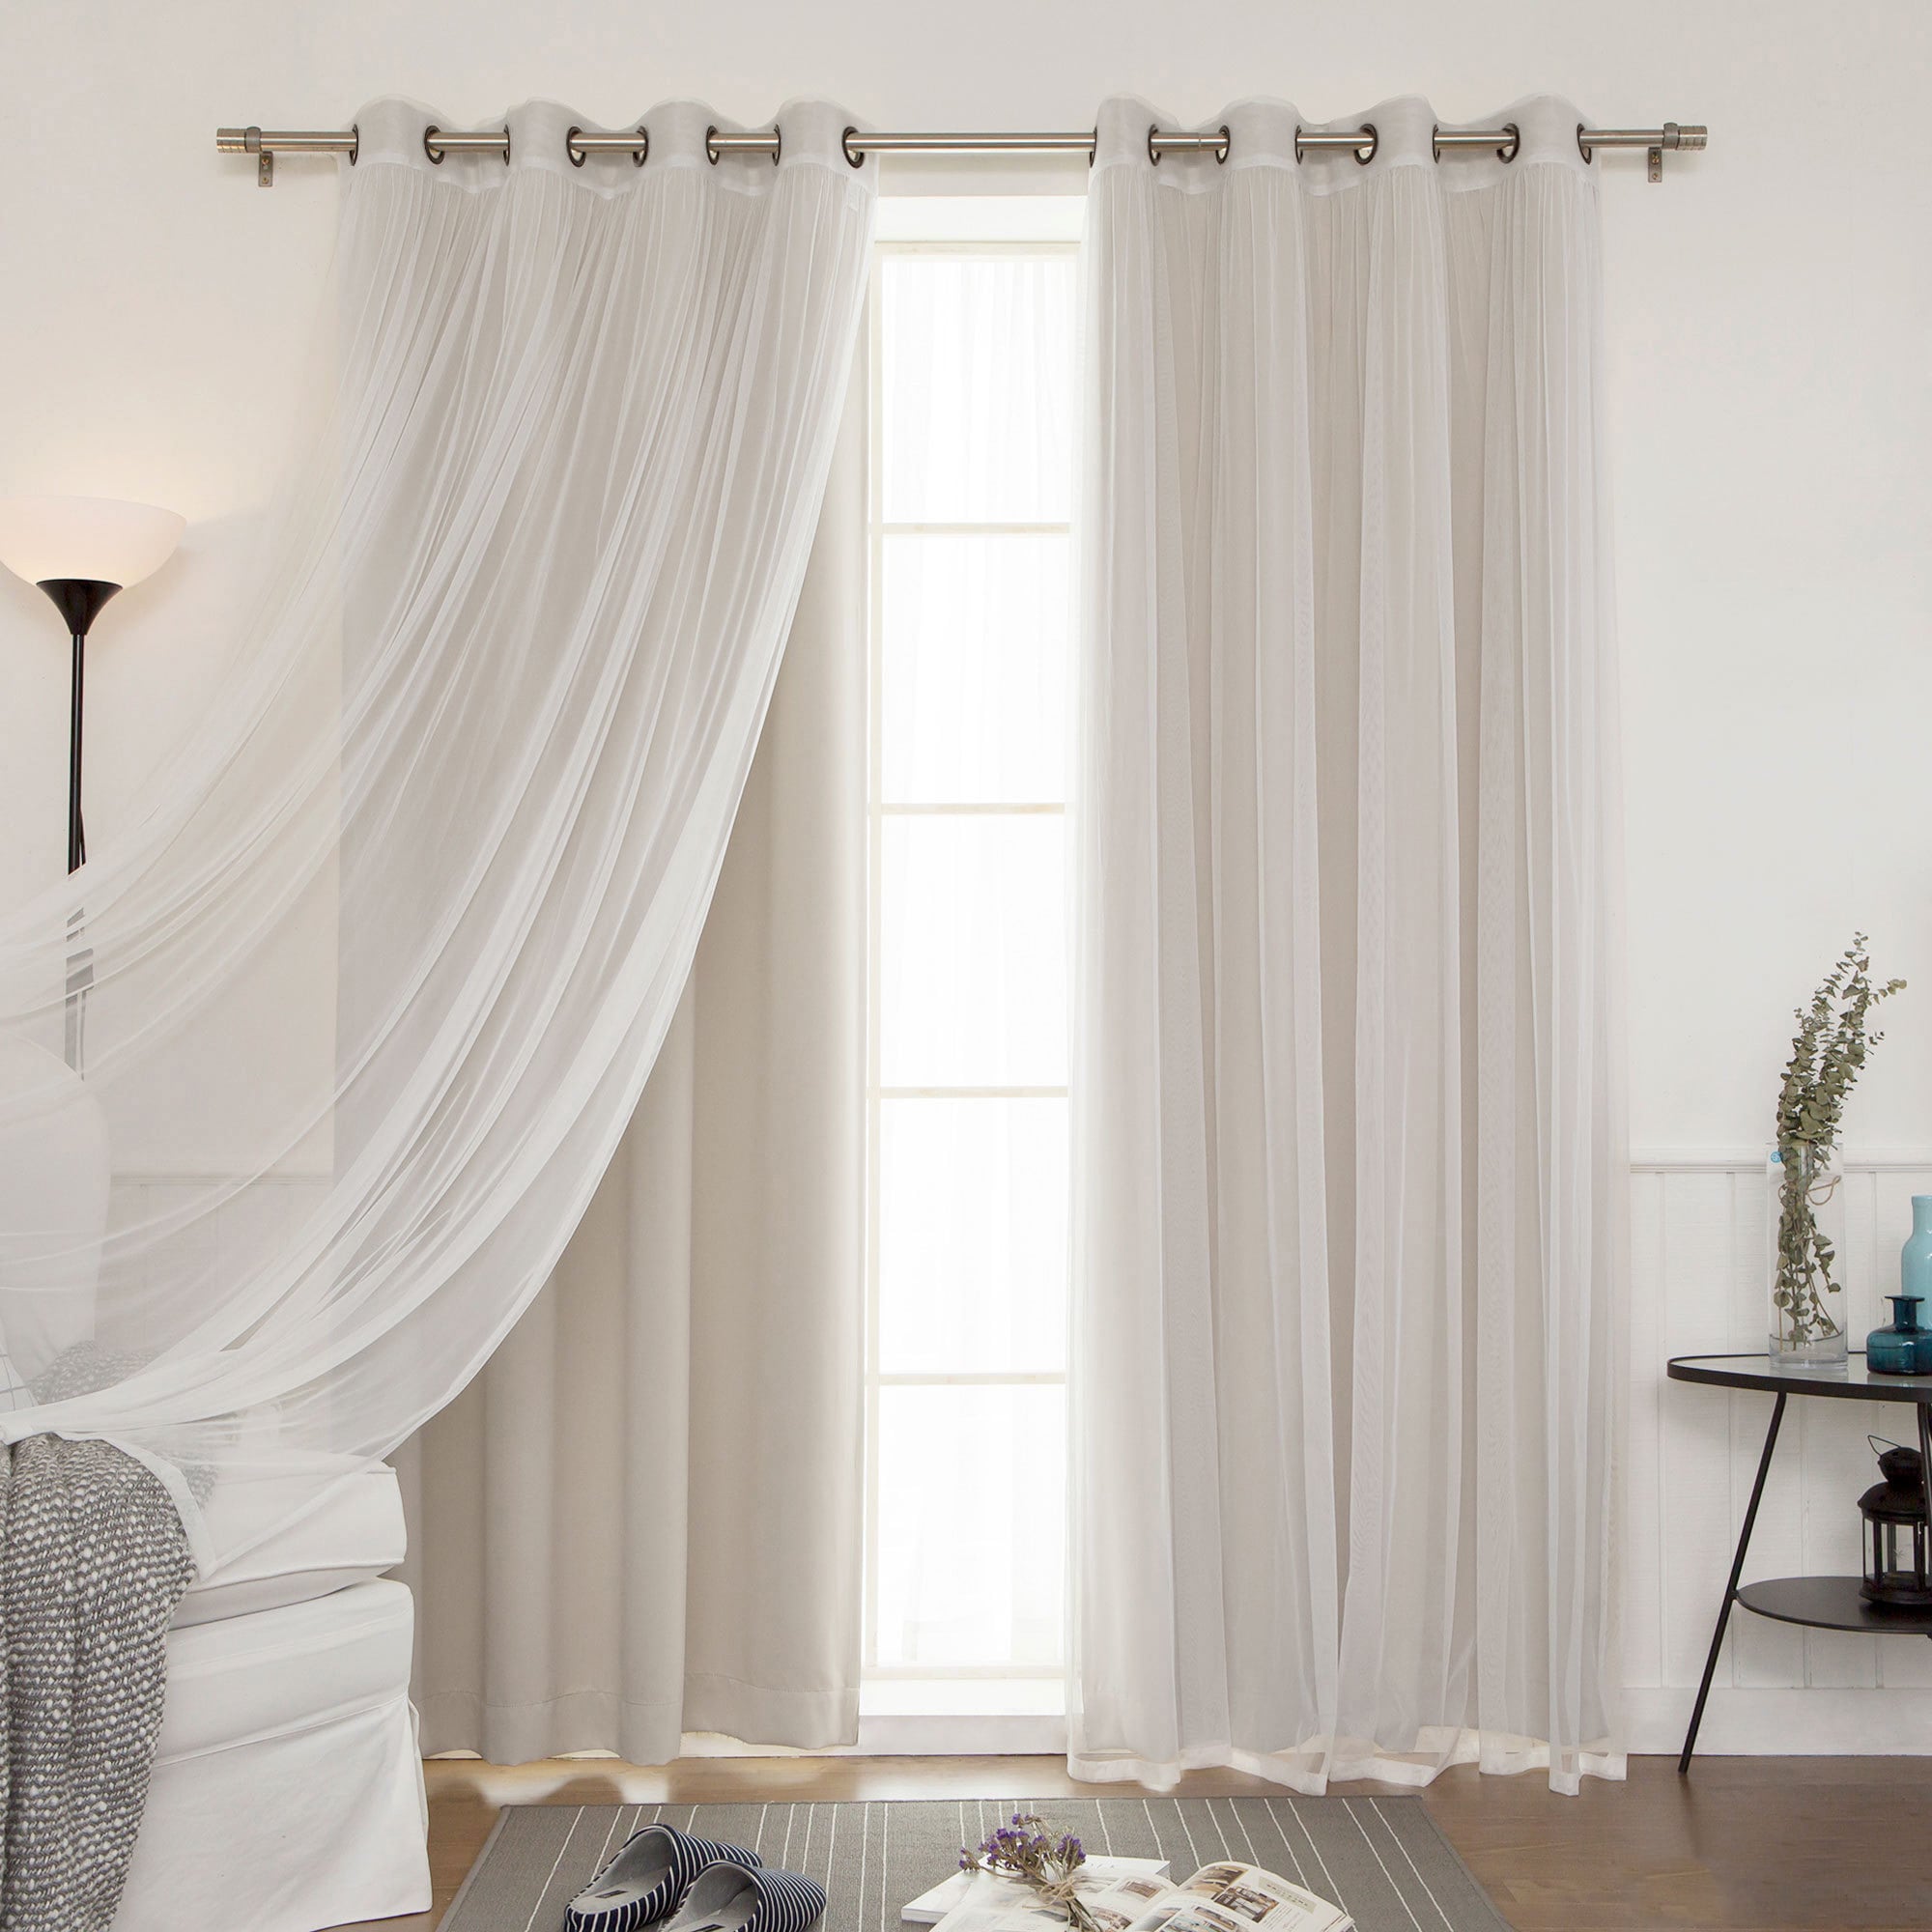 Bedroom Window Curtains Living Room Sheer Voile Sun Shading Curtain Home 